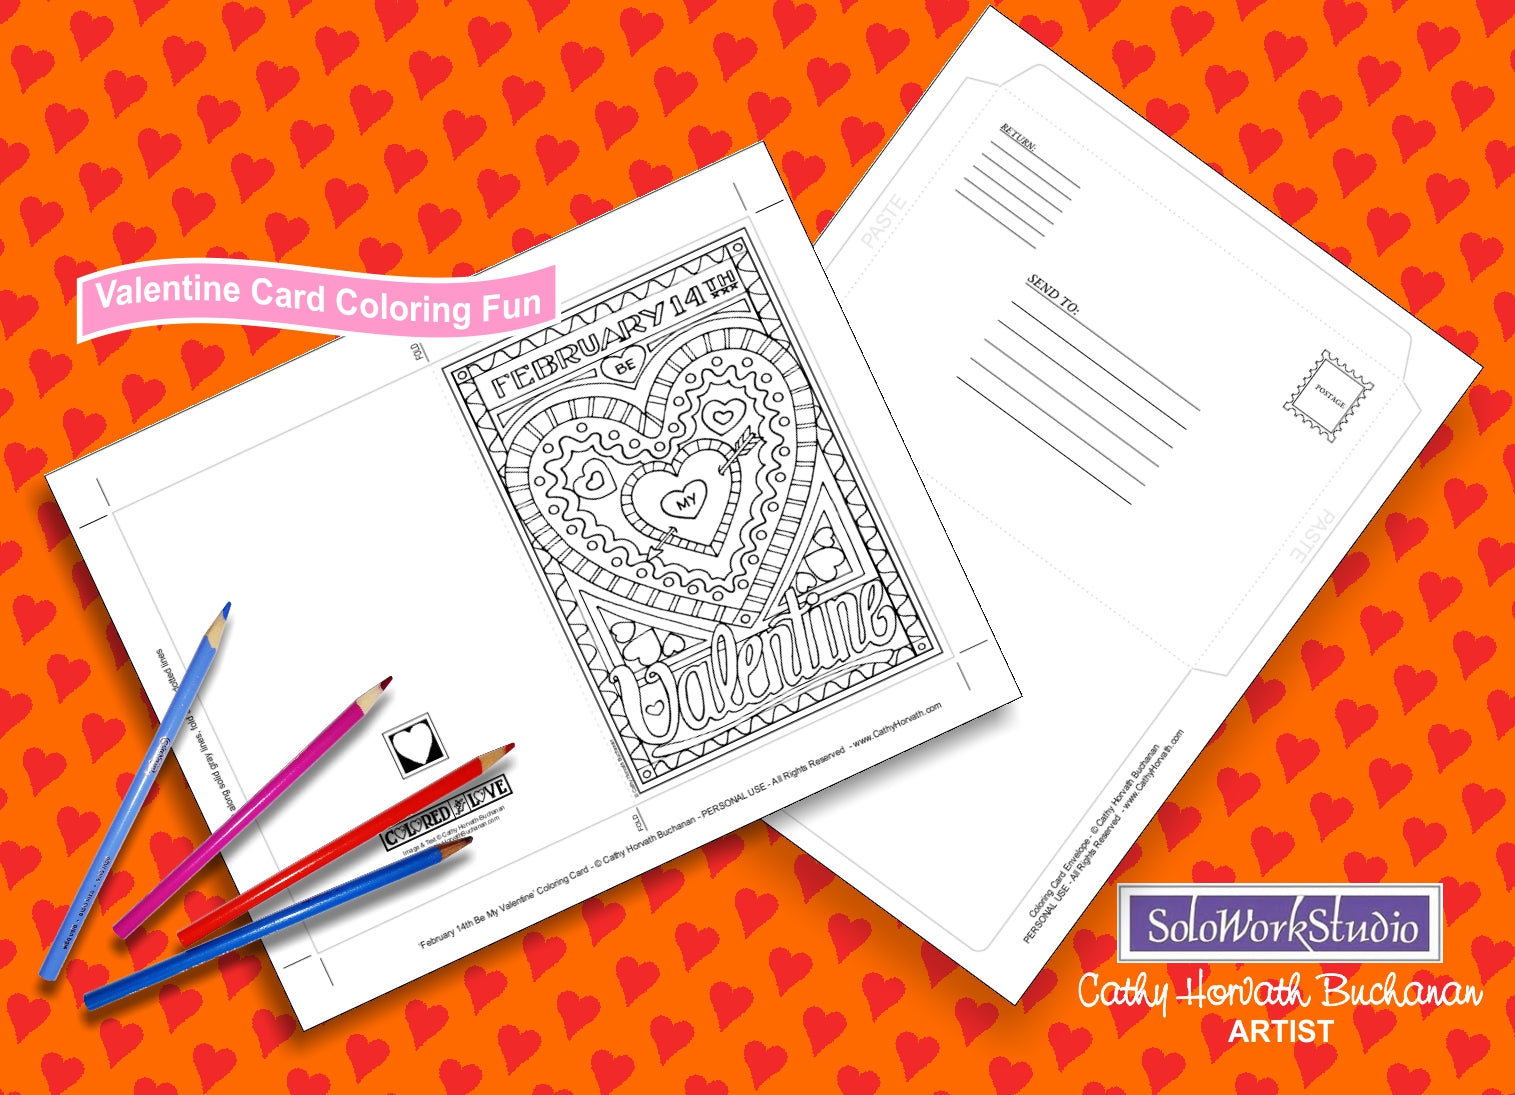 Be My Feb 14th Valentine, Coloring Kit Card + Envelope, PDF Instant Download